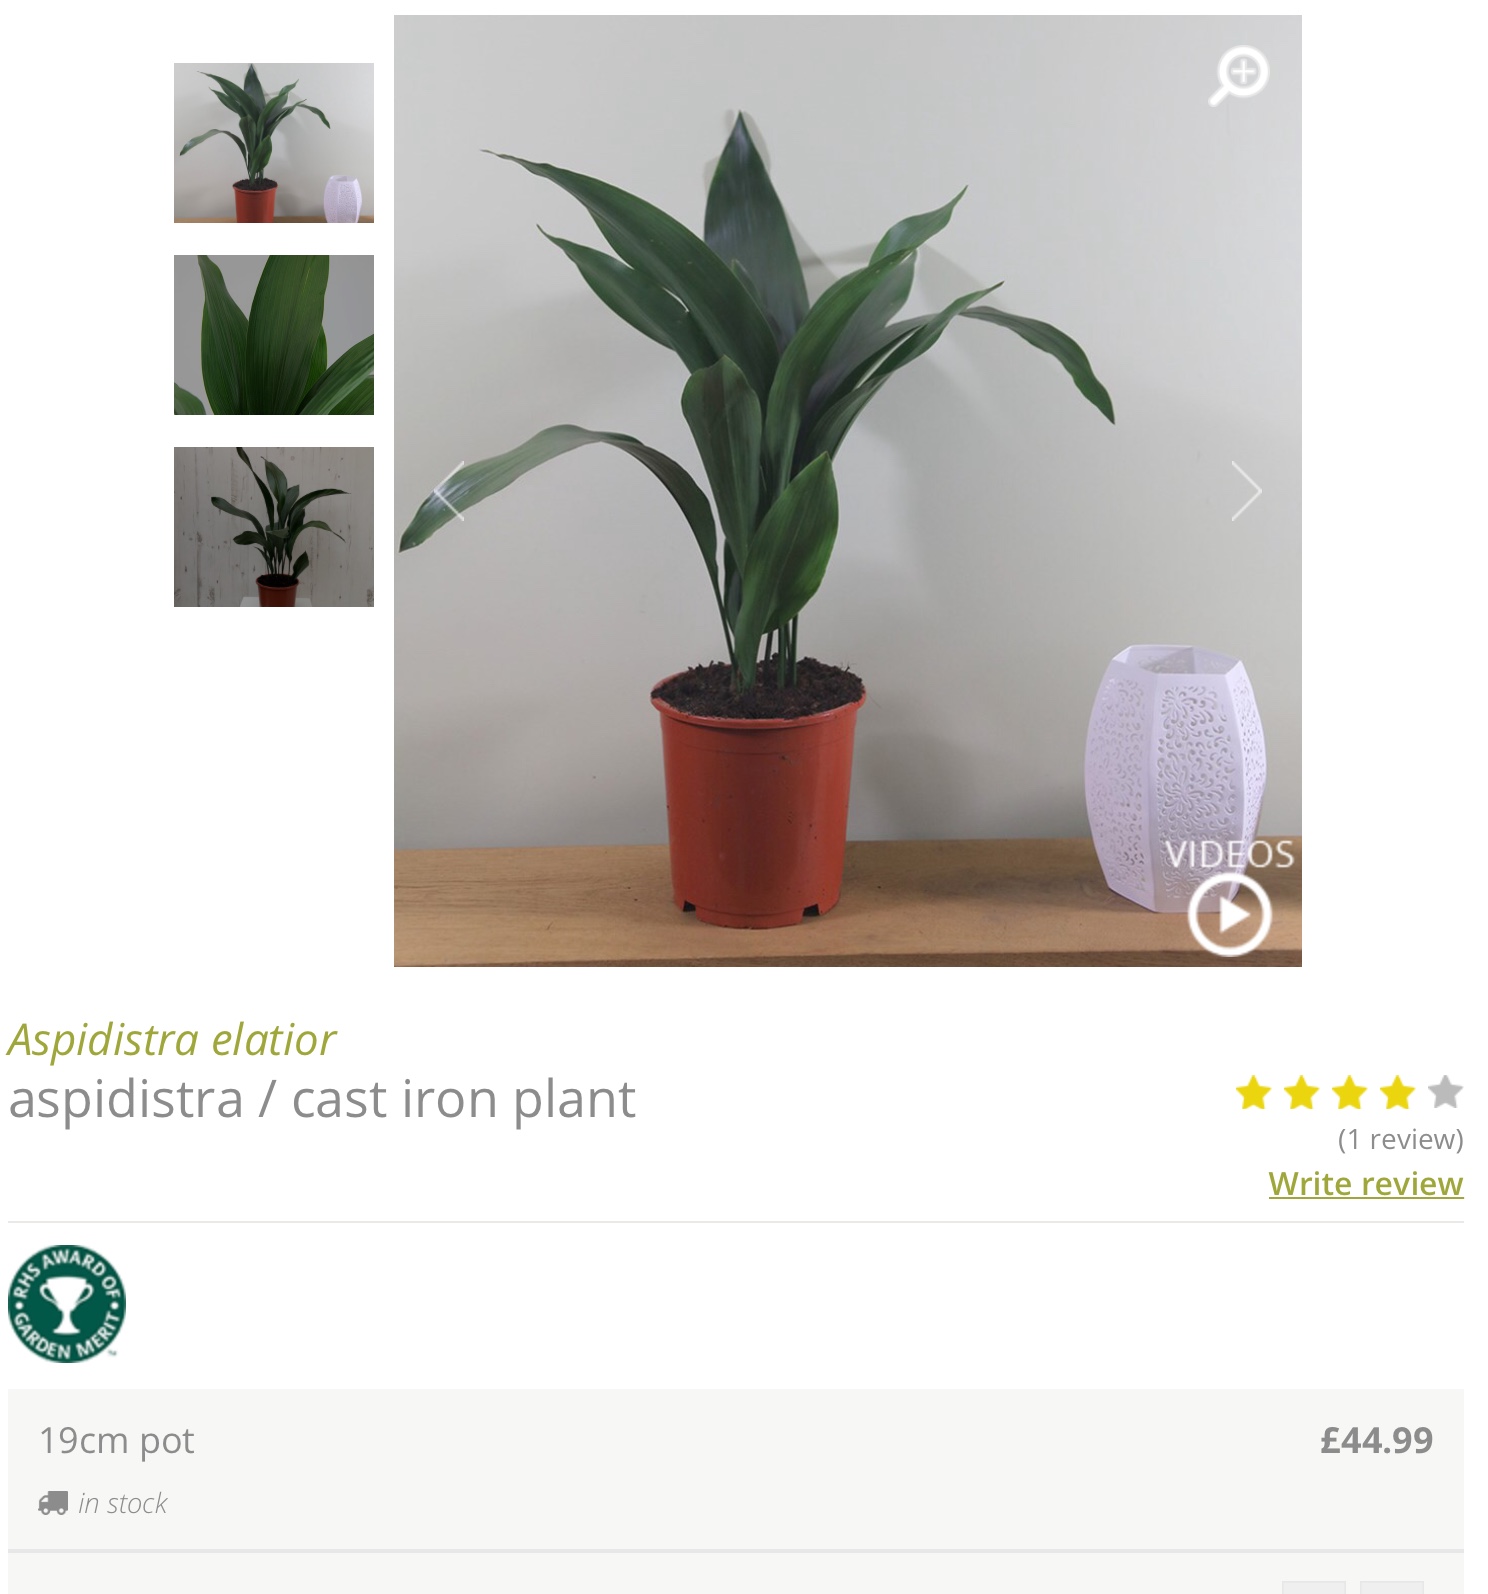 Check the price and compare the baby … with the Biggest Aspidistra in the world.